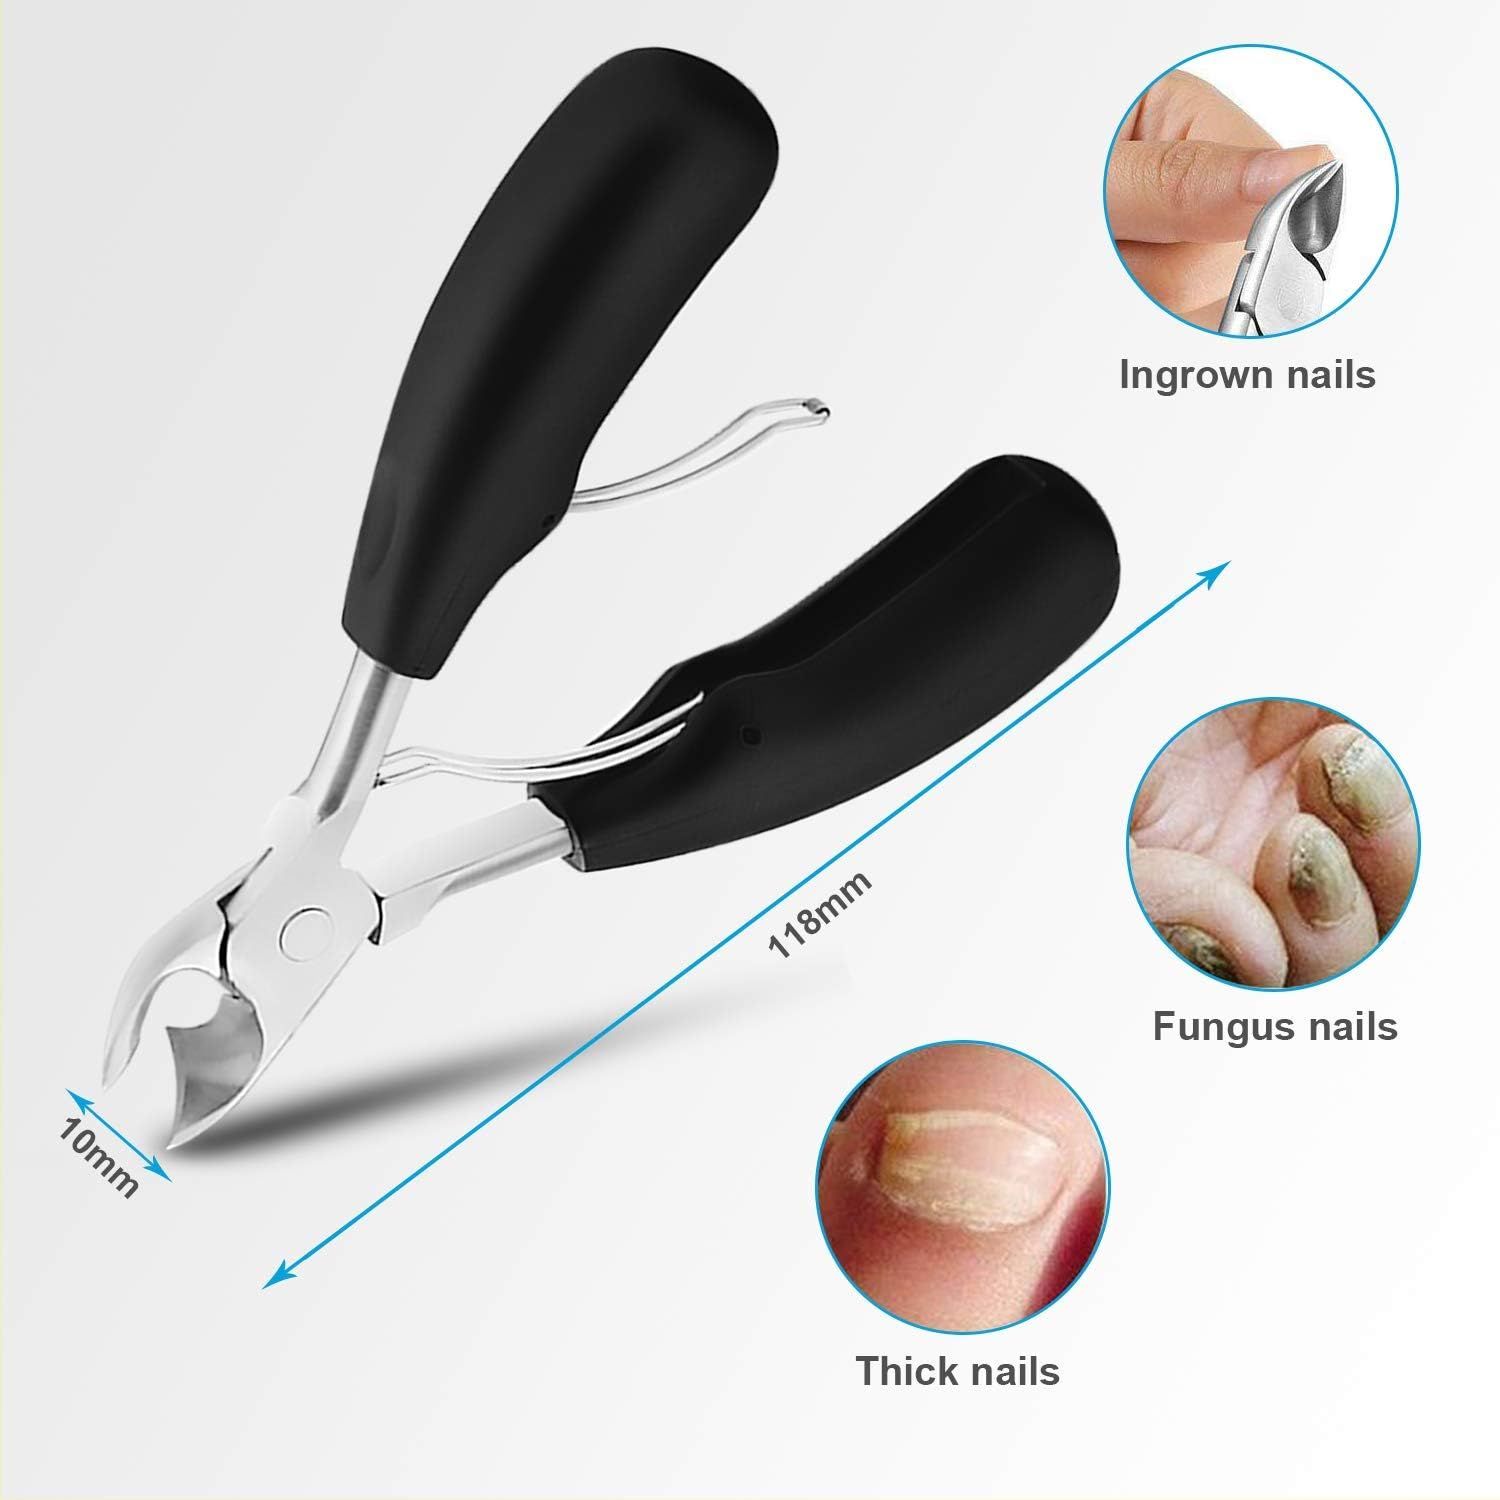 Thick Toenail Clippers, Podiatrist Toe Nail Clippers for Ingrown